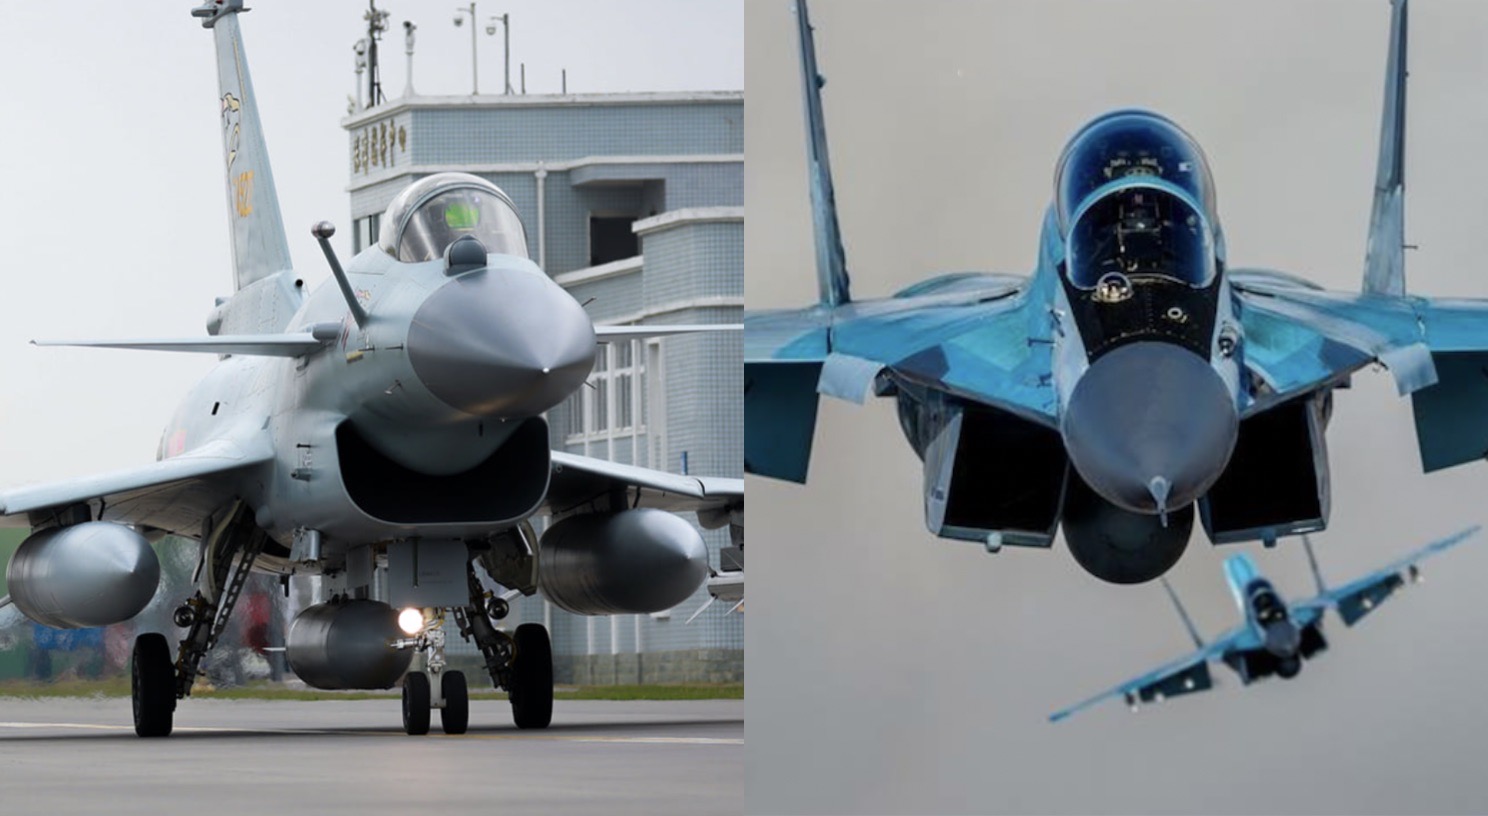 J 10c Vs Mig 35 Why Tehran Might Choose The Chinese Firebird Over The Russian Fulcrum For Fleet Modernisation